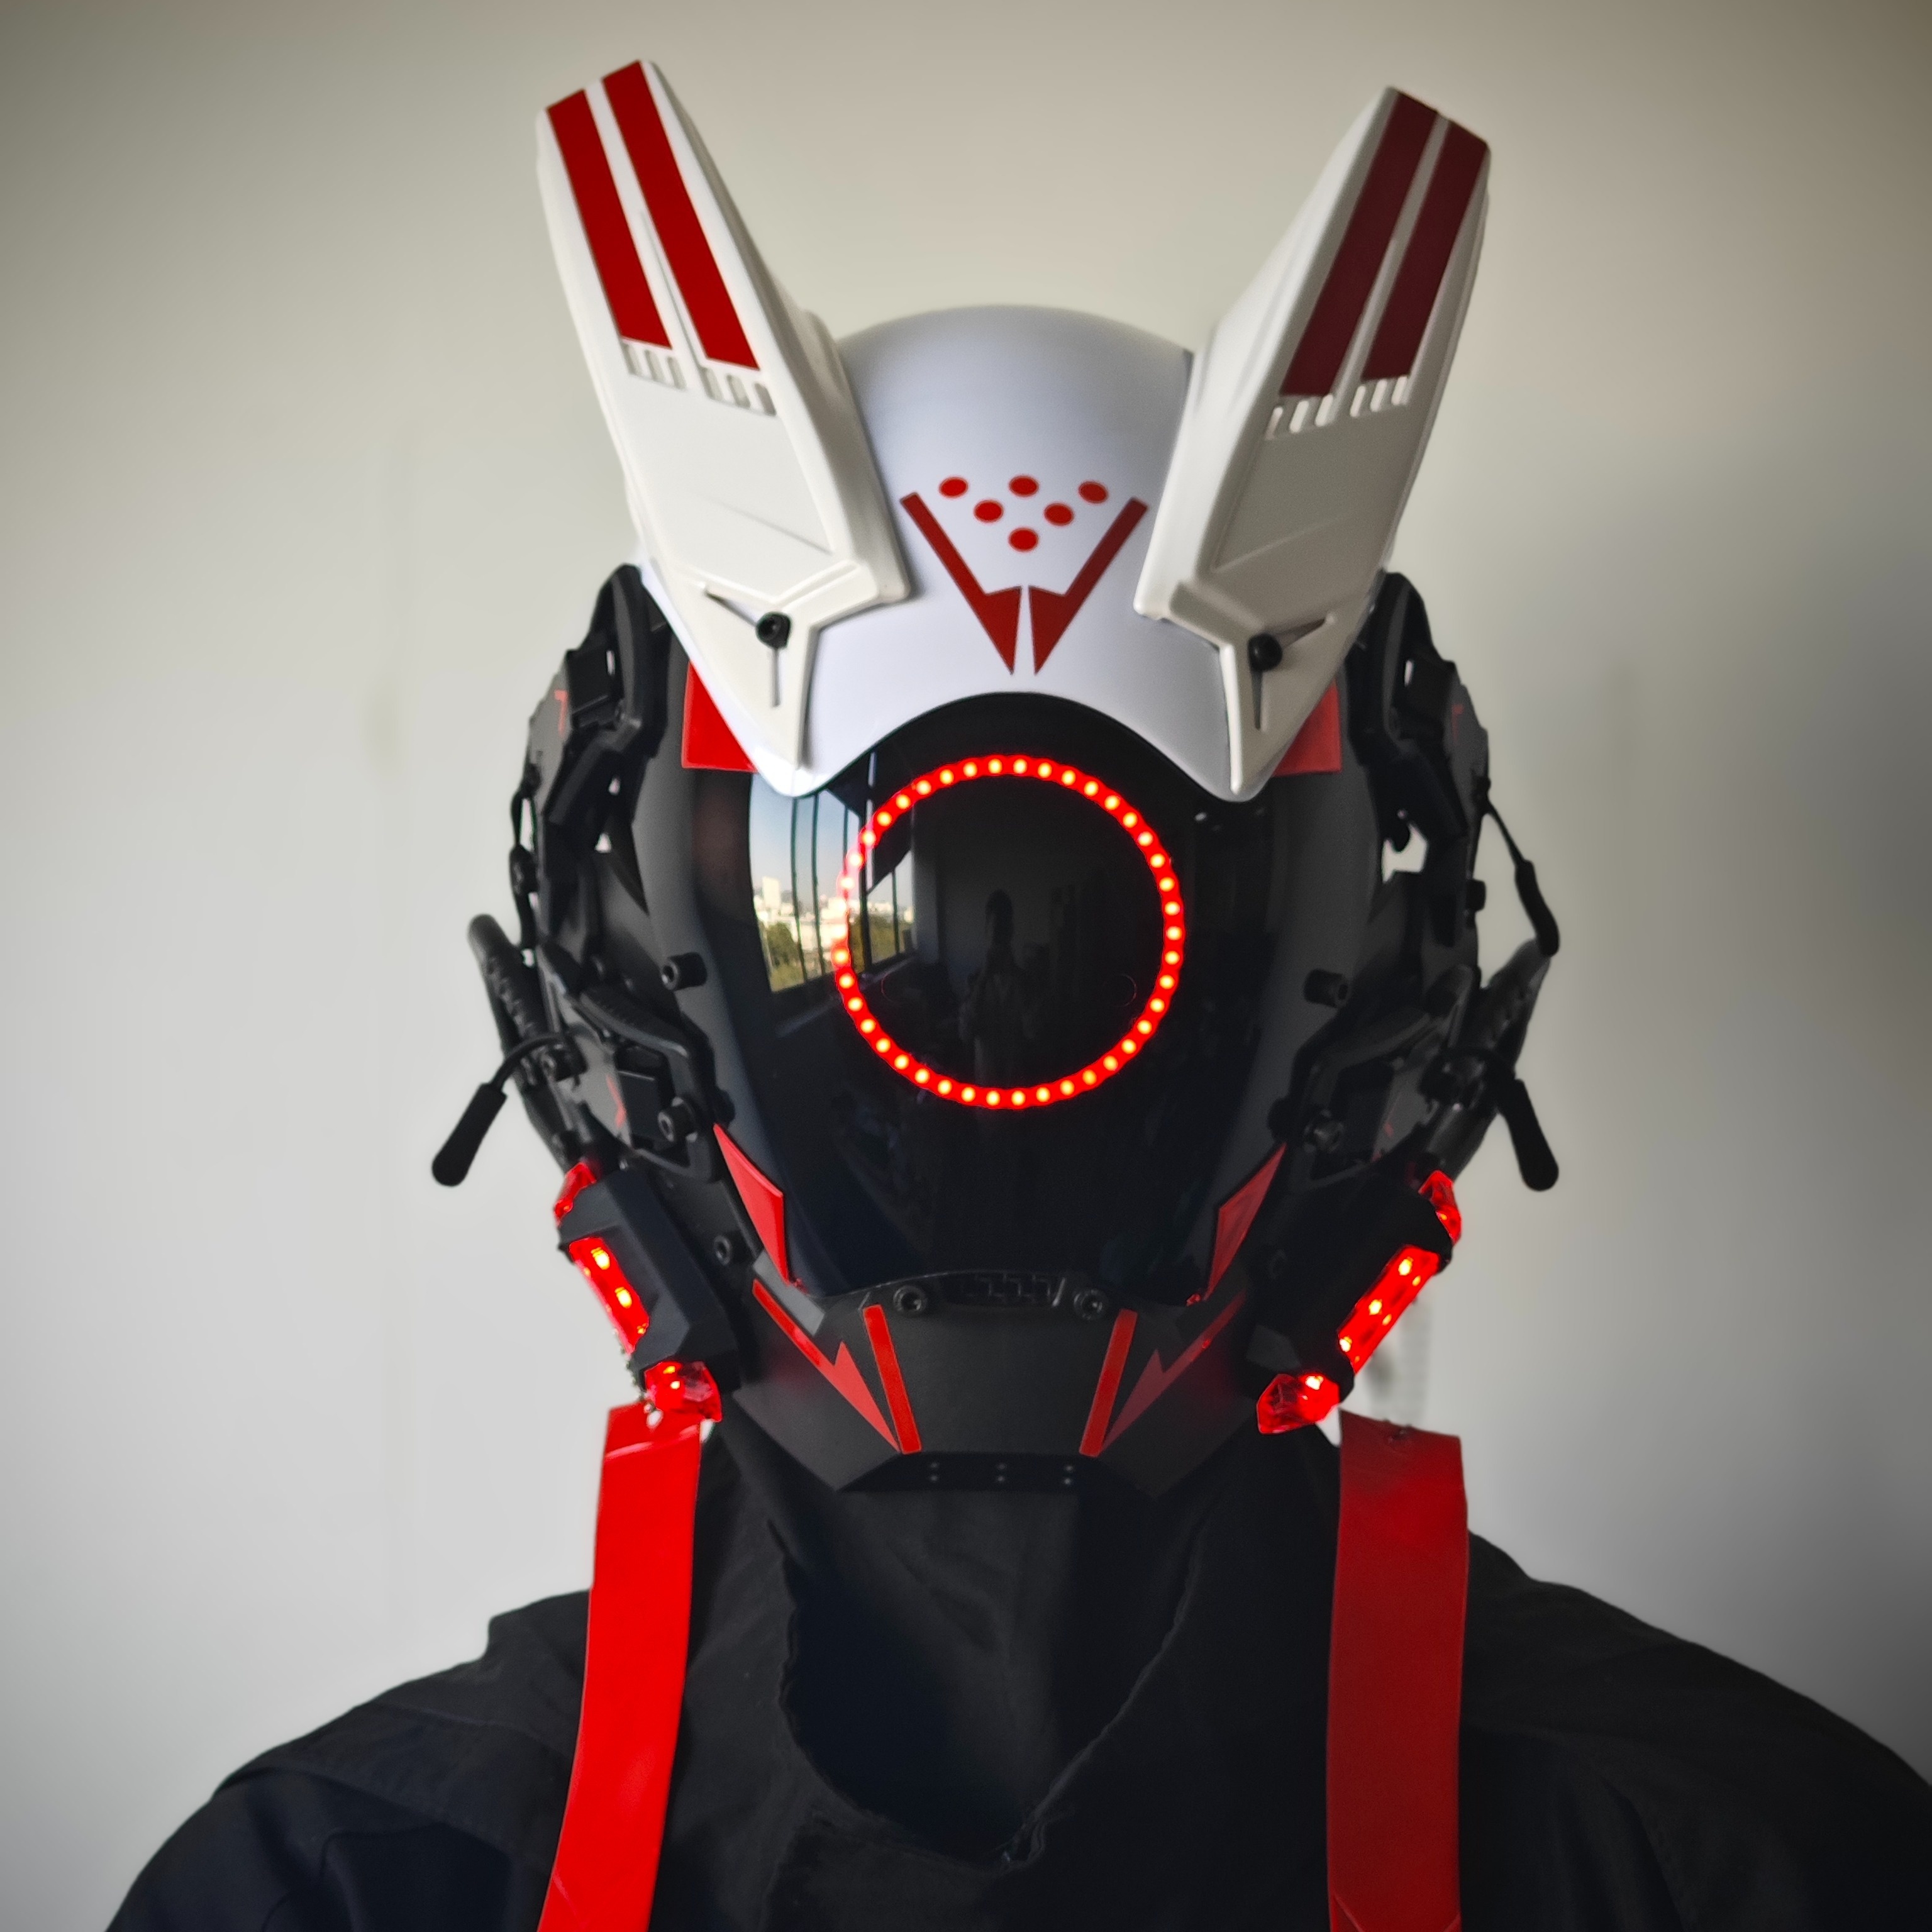 Cyberpunk Half Face Shield Tech Mask Cosplay Prop for Halloween Party  Cosplay Prop - Red